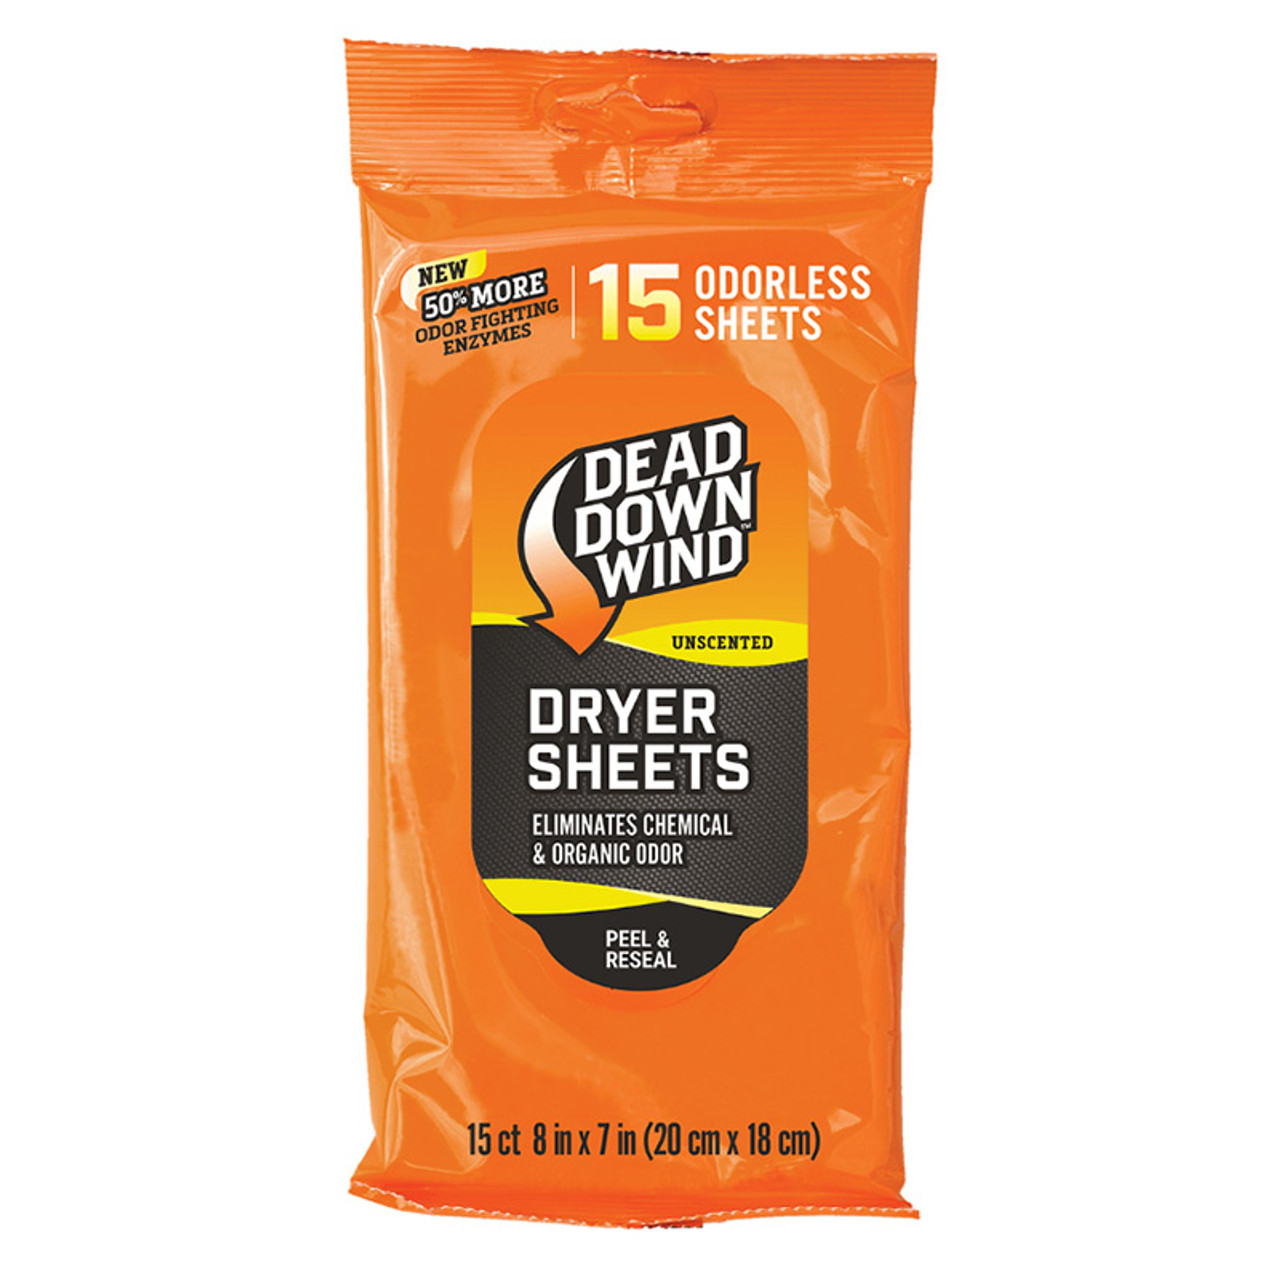 Unscented Dryer Sheets 15 ct by Dead Down Wind